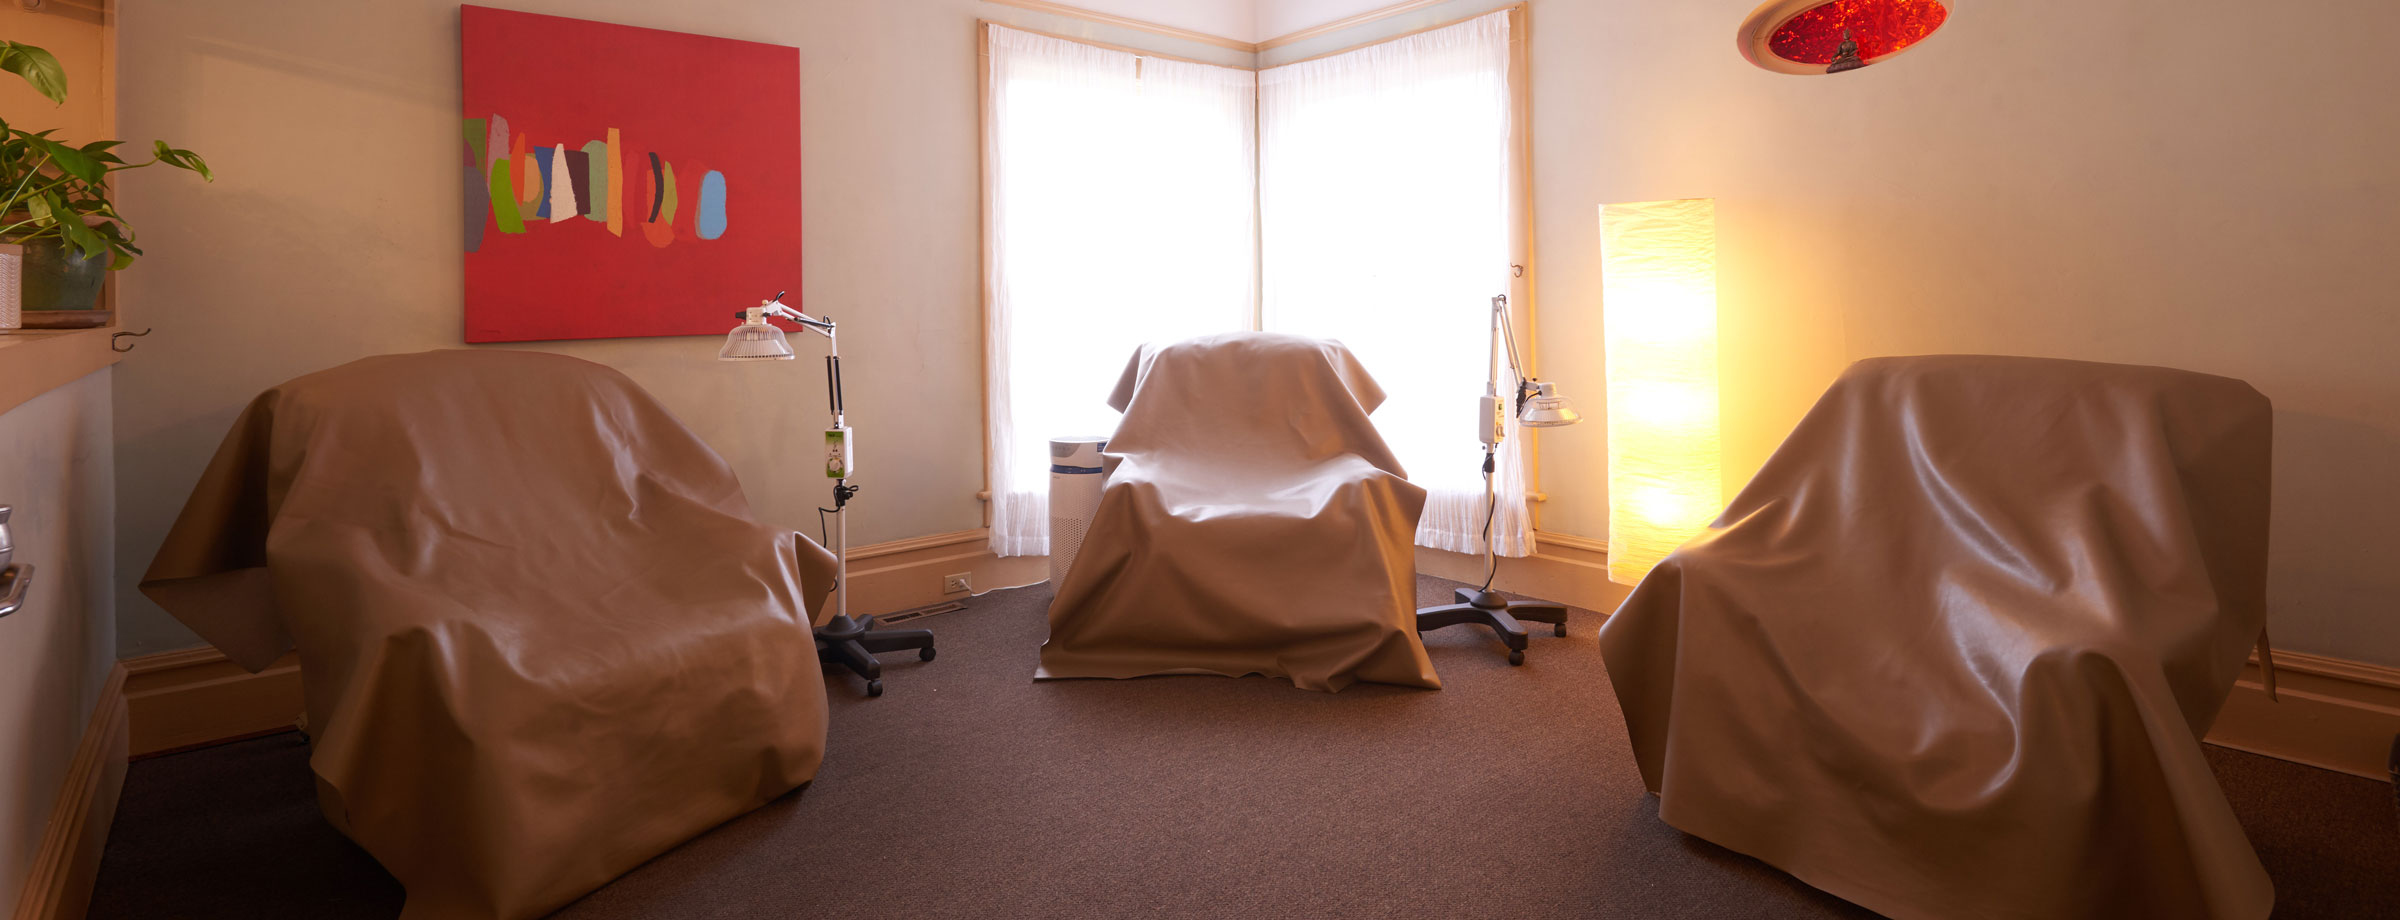 An interior photo showing three chairs, artwork, and lamps at Sebastopol Community Acupuncture